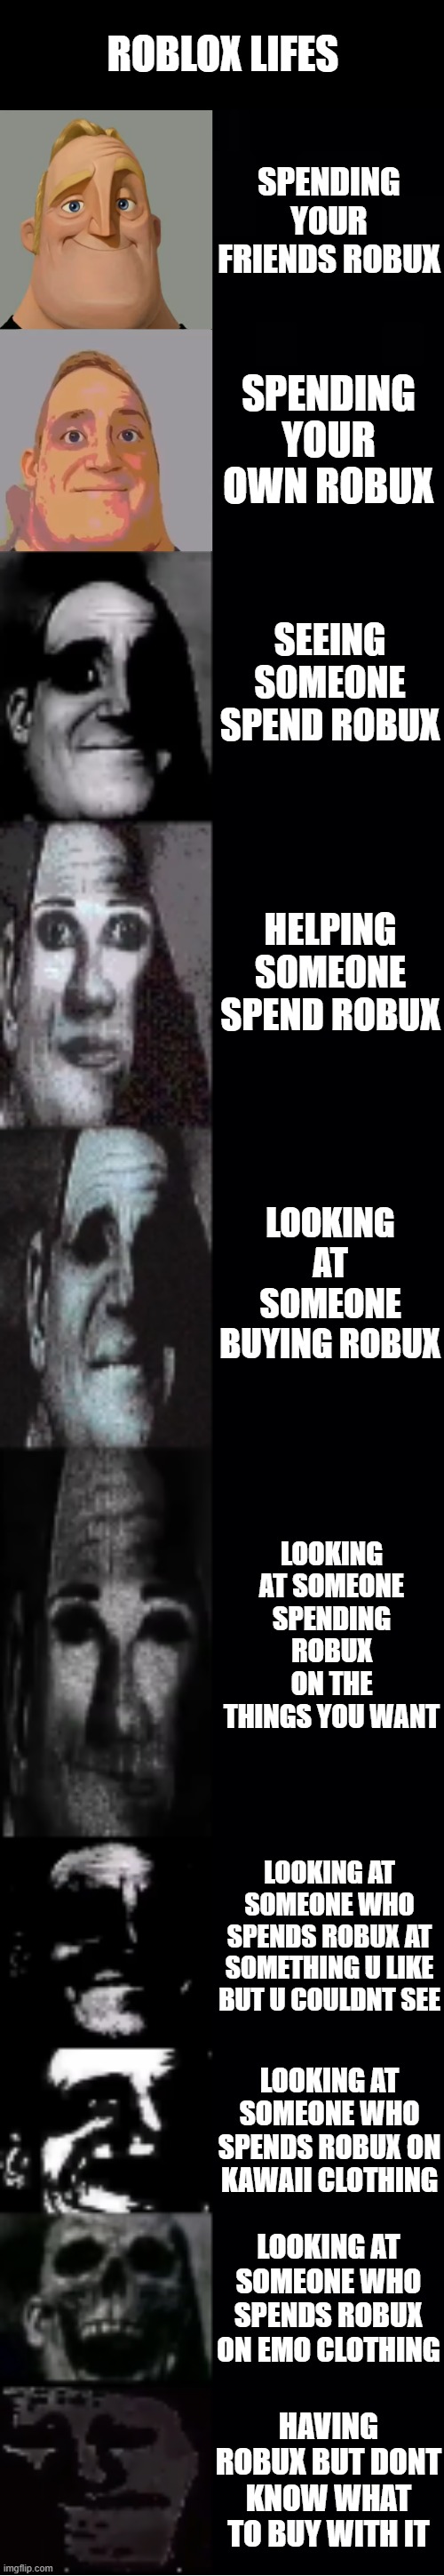 Roblox life | ROBLOX LIFES; SPENDING YOUR FRIENDS ROBUX; SPENDING YOUR OWN ROBUX; SEEING SOMEONE SPEND ROBUX; HELPING SOMEONE SPEND ROBUX; LOOKING AT SOMEONE BUYING ROBUX; LOOKING AT SOMEONE SPENDING ROBUX ON THE THINGS YOU WANT; LOOKING AT SOMEONE WHO SPENDS ROBUX AT SOMETHING U LIKE BUT U COULDNT SEE; LOOKING AT SOMEONE WHO SPENDS ROBUX ON KAWAII CLOTHING; LOOKING AT SOMEONE WHO SPENDS ROBUX ON EMO CLOTHING; HAVING ROBUX BUT DONT KNOW WHAT TO BUY WITH IT | image tagged in roblox | made w/ Imgflip meme maker